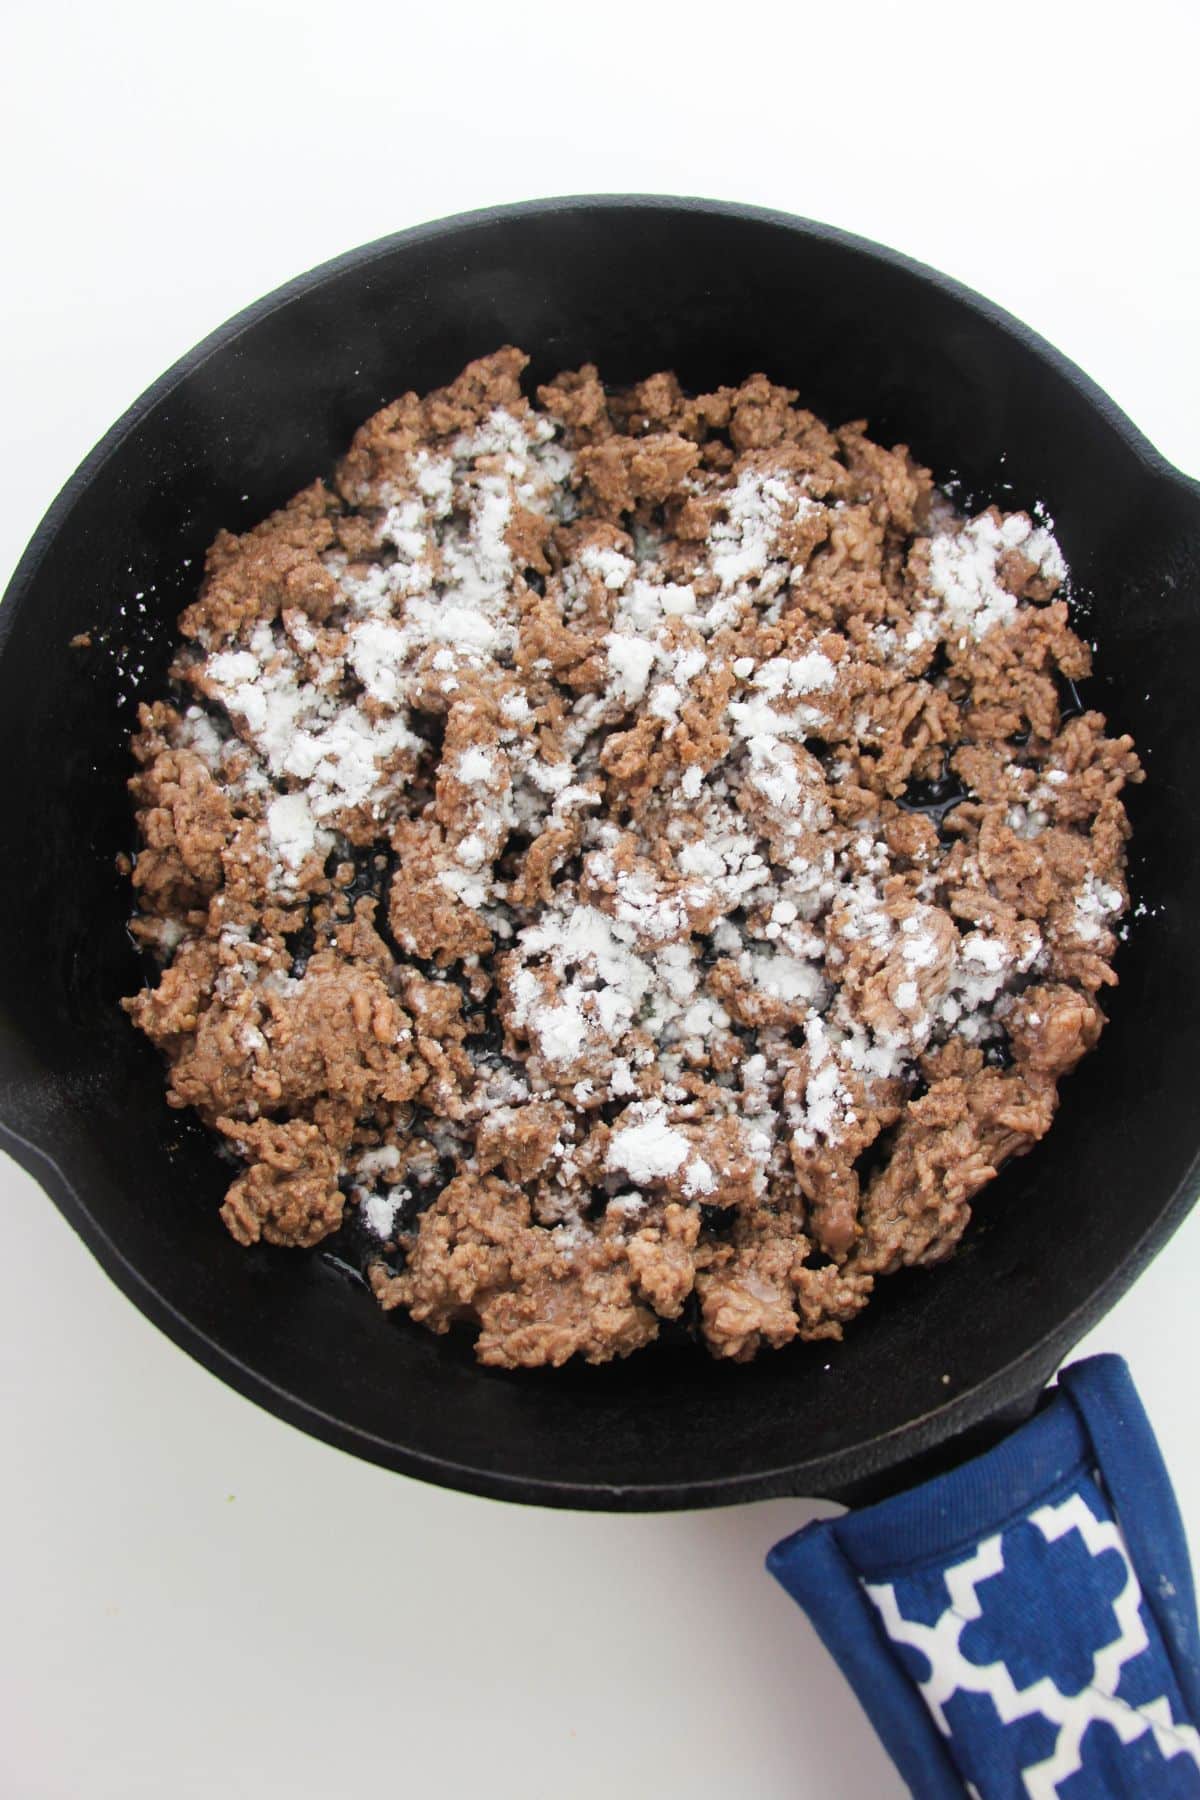 Cornstarch is added to the beef in a skillet.